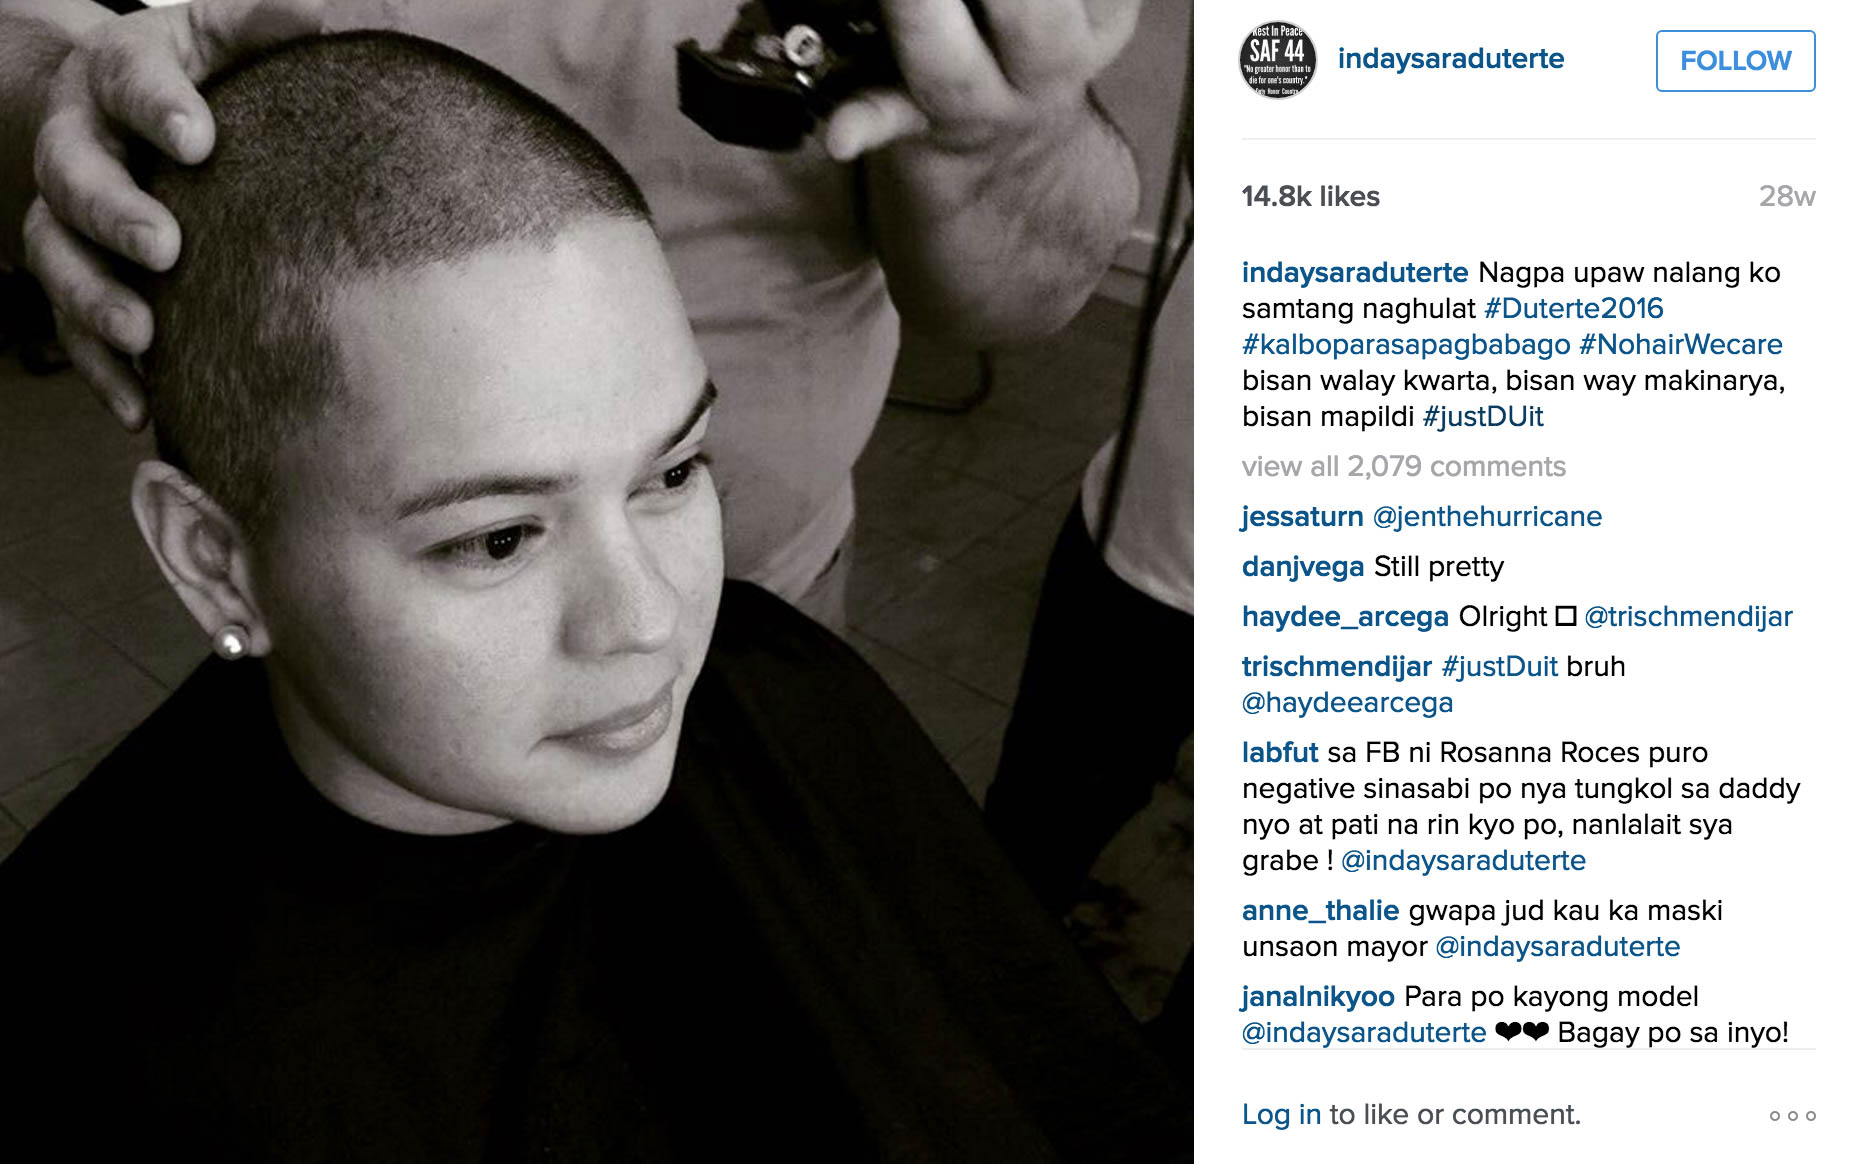 Inday Sara: Duterte daughter shuns First Lady role 4